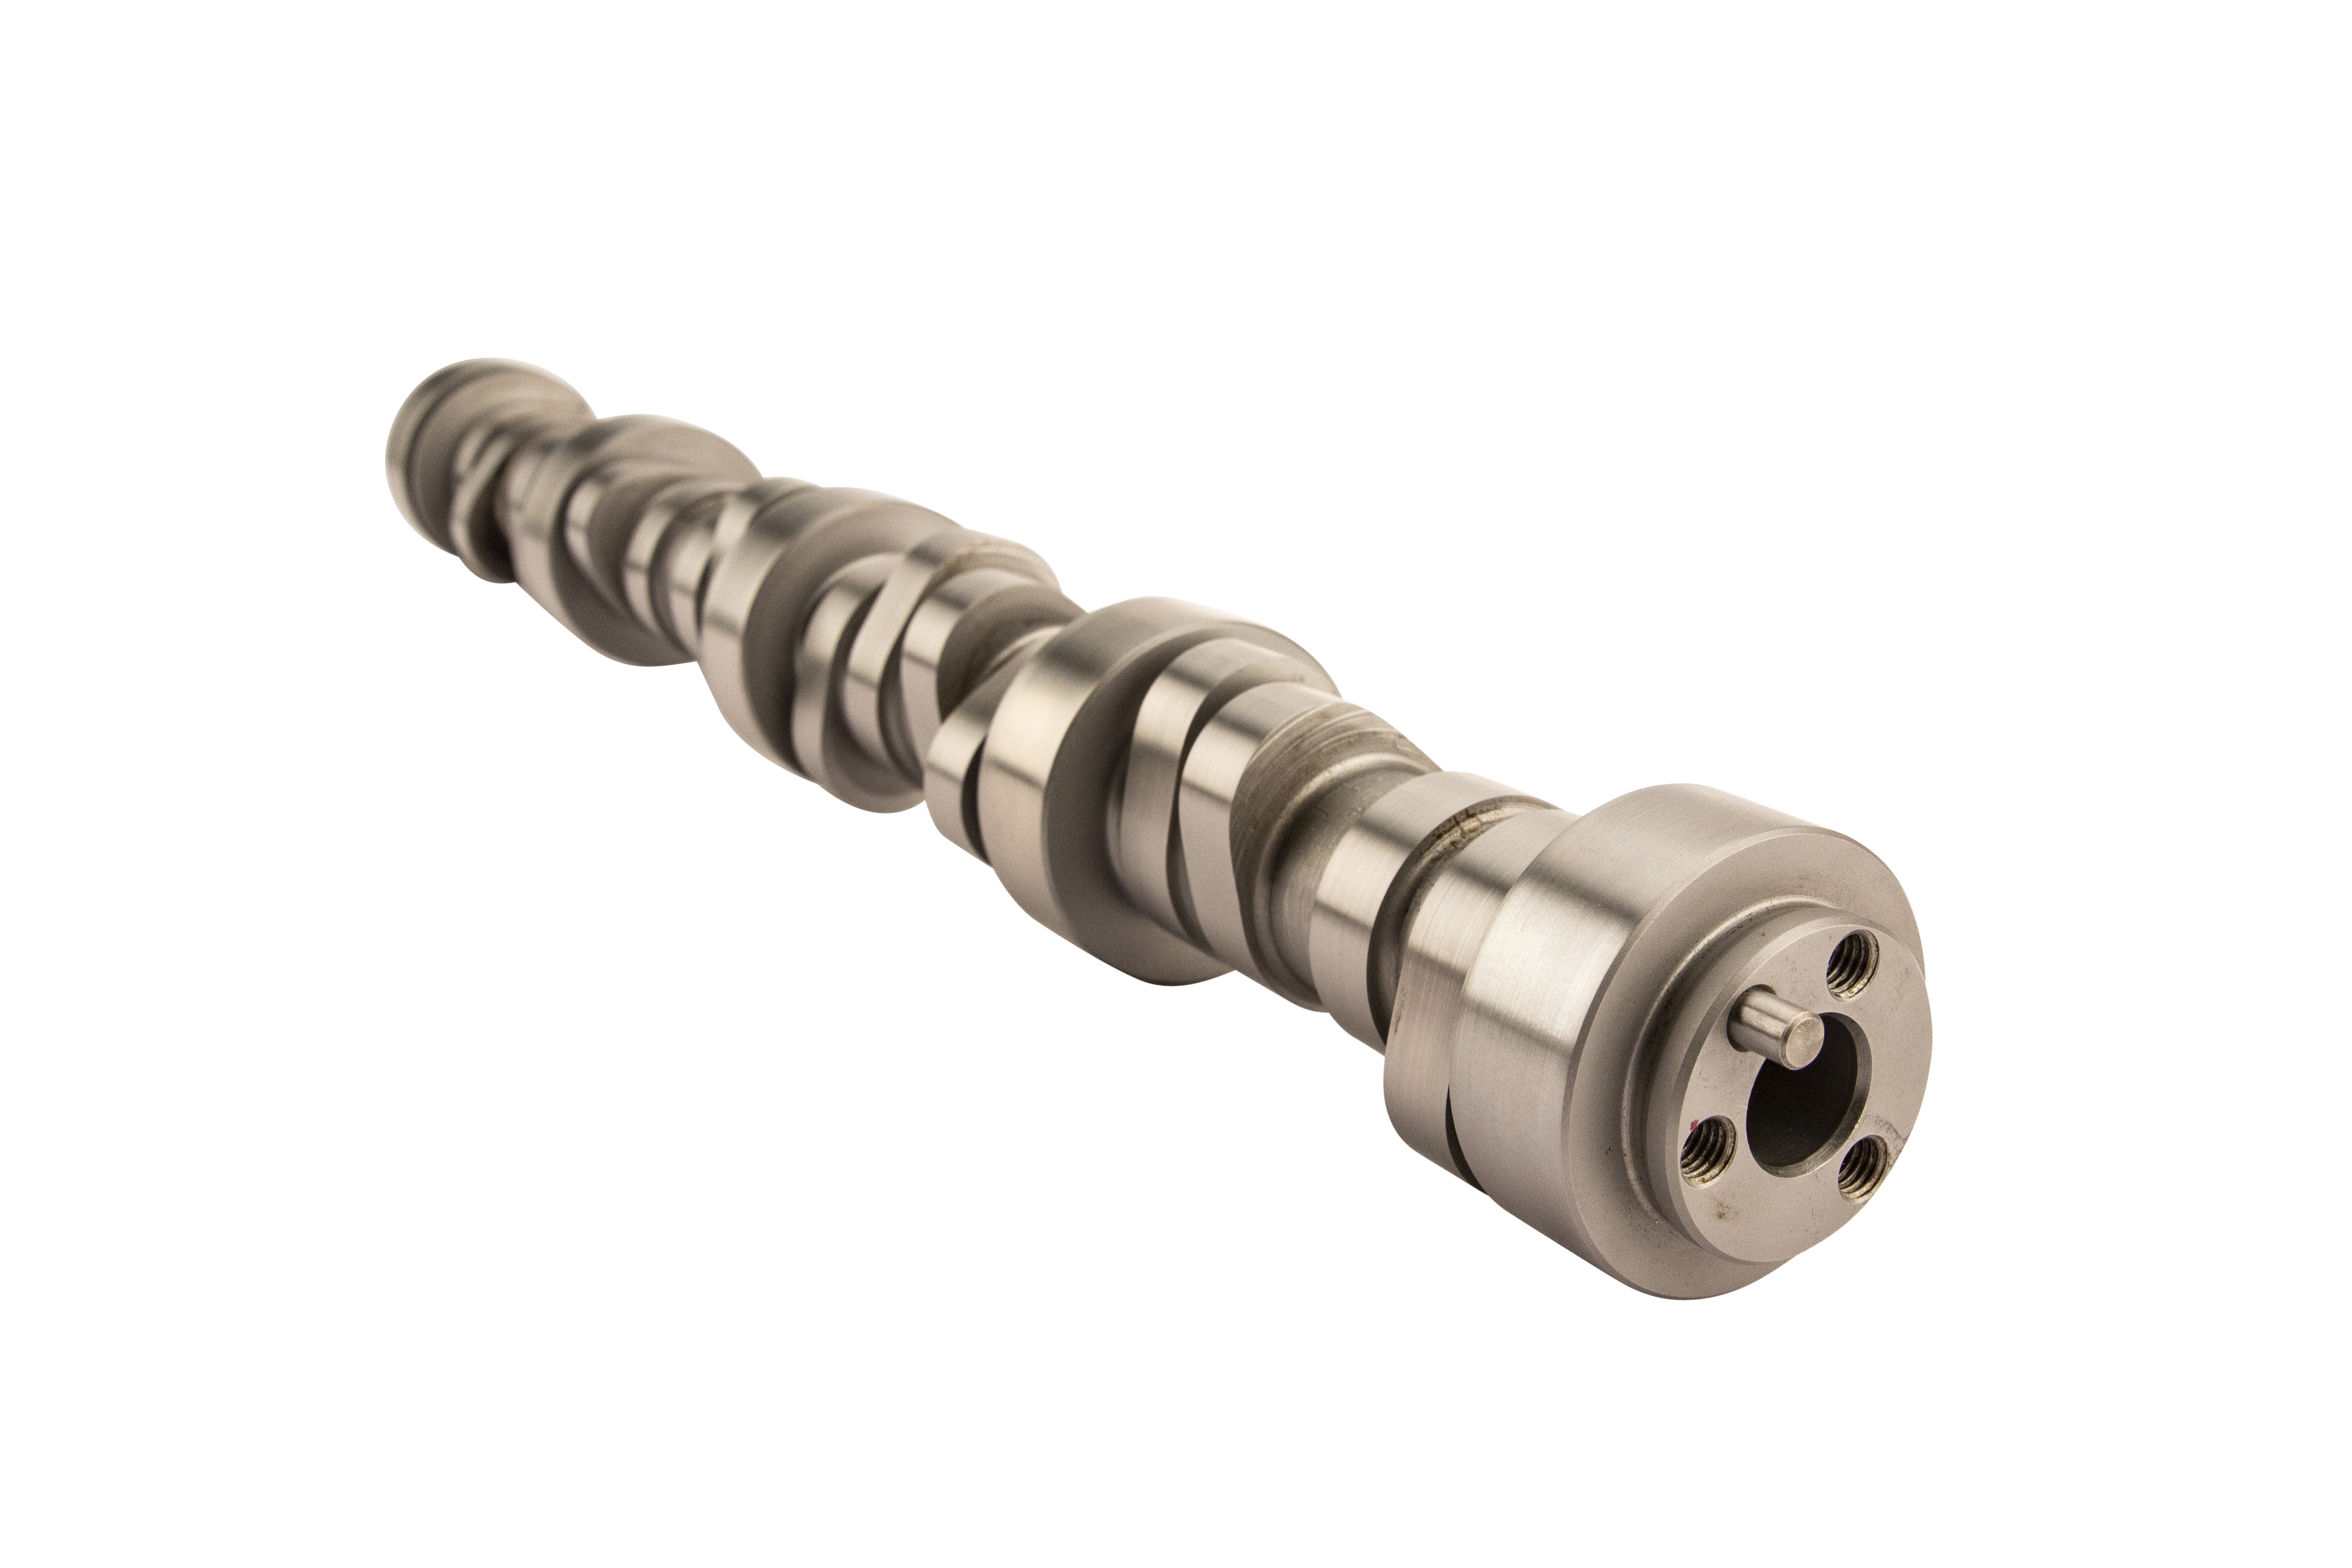 97-2013 Corvette, 10-15 Camaro & Others, TruckMax Hydraulic Roller 200/208 Camshaft for 3-Bolt GM LS, Part 1449541